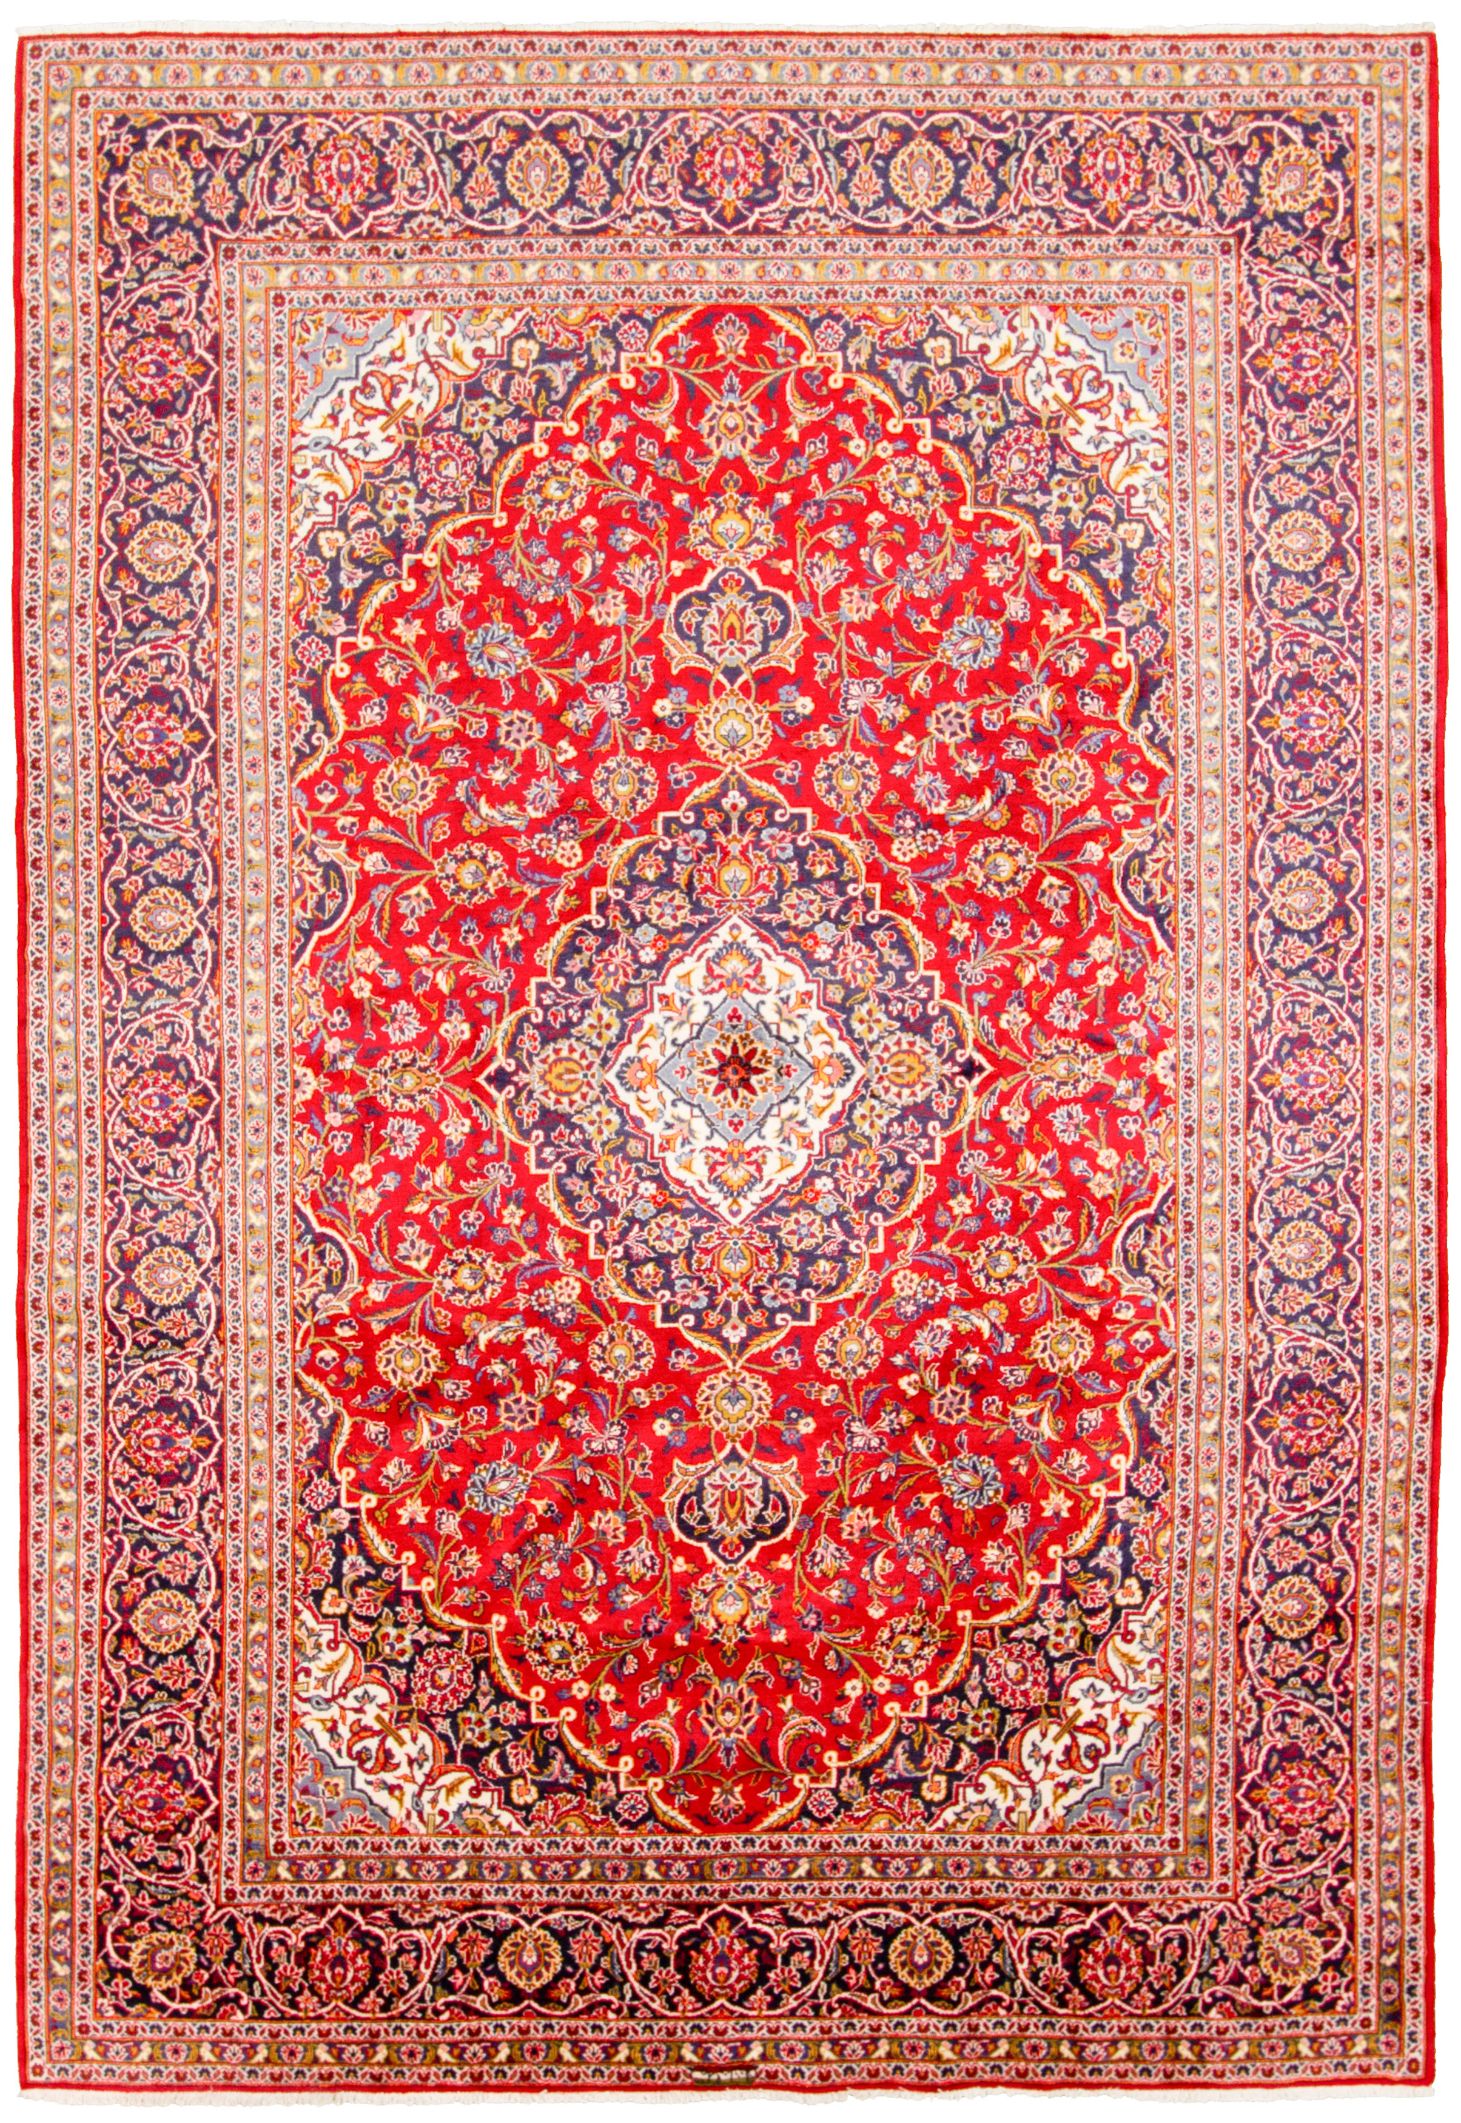 Hand-knotted Kashan  Wool Rug 8'2" x 12'1" Size: 8'2" x 12'1"  